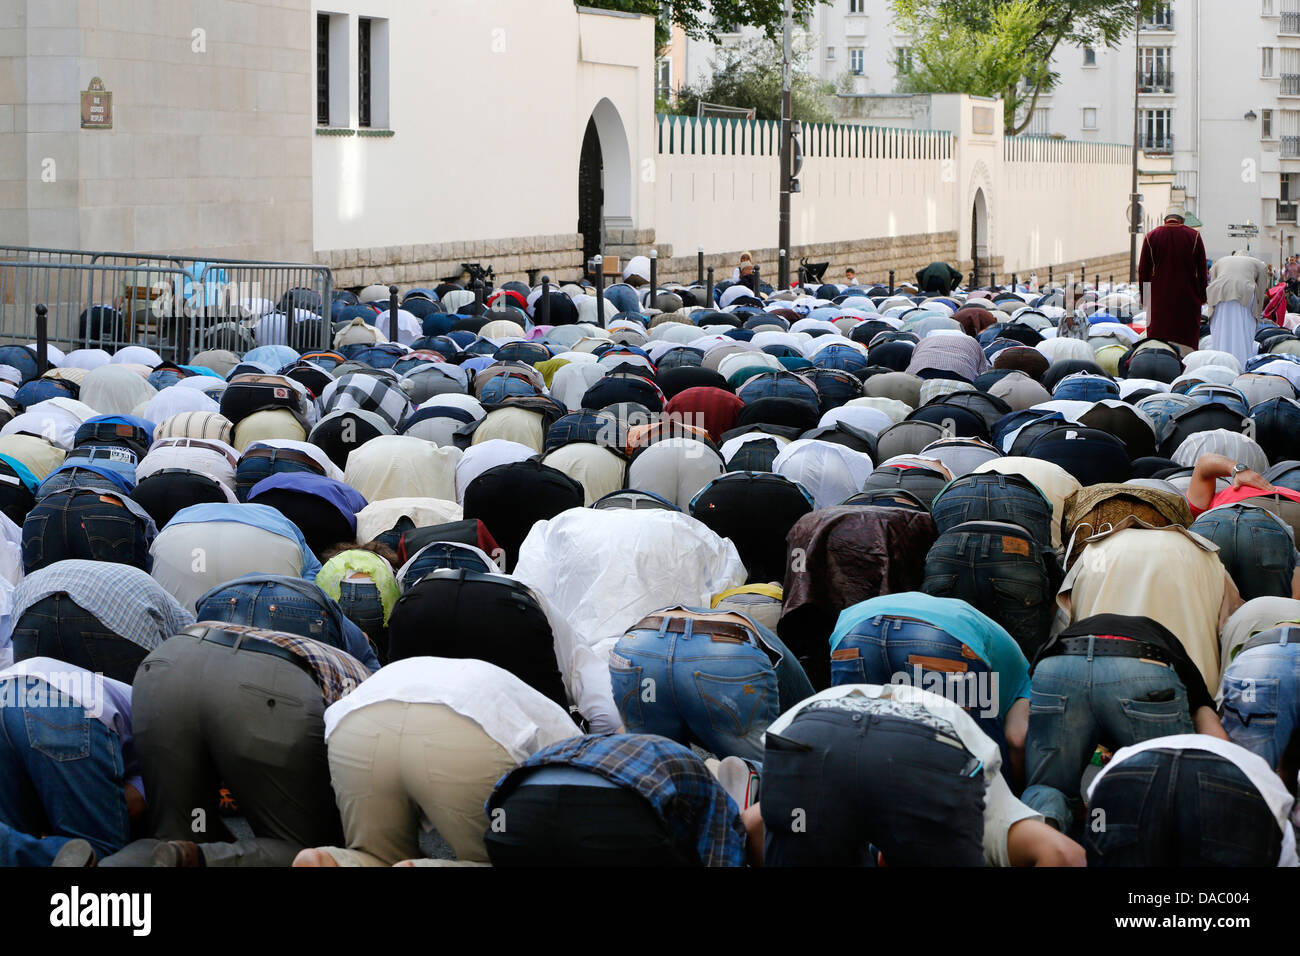 Image result for muslim kneeling down to pray on streets of france